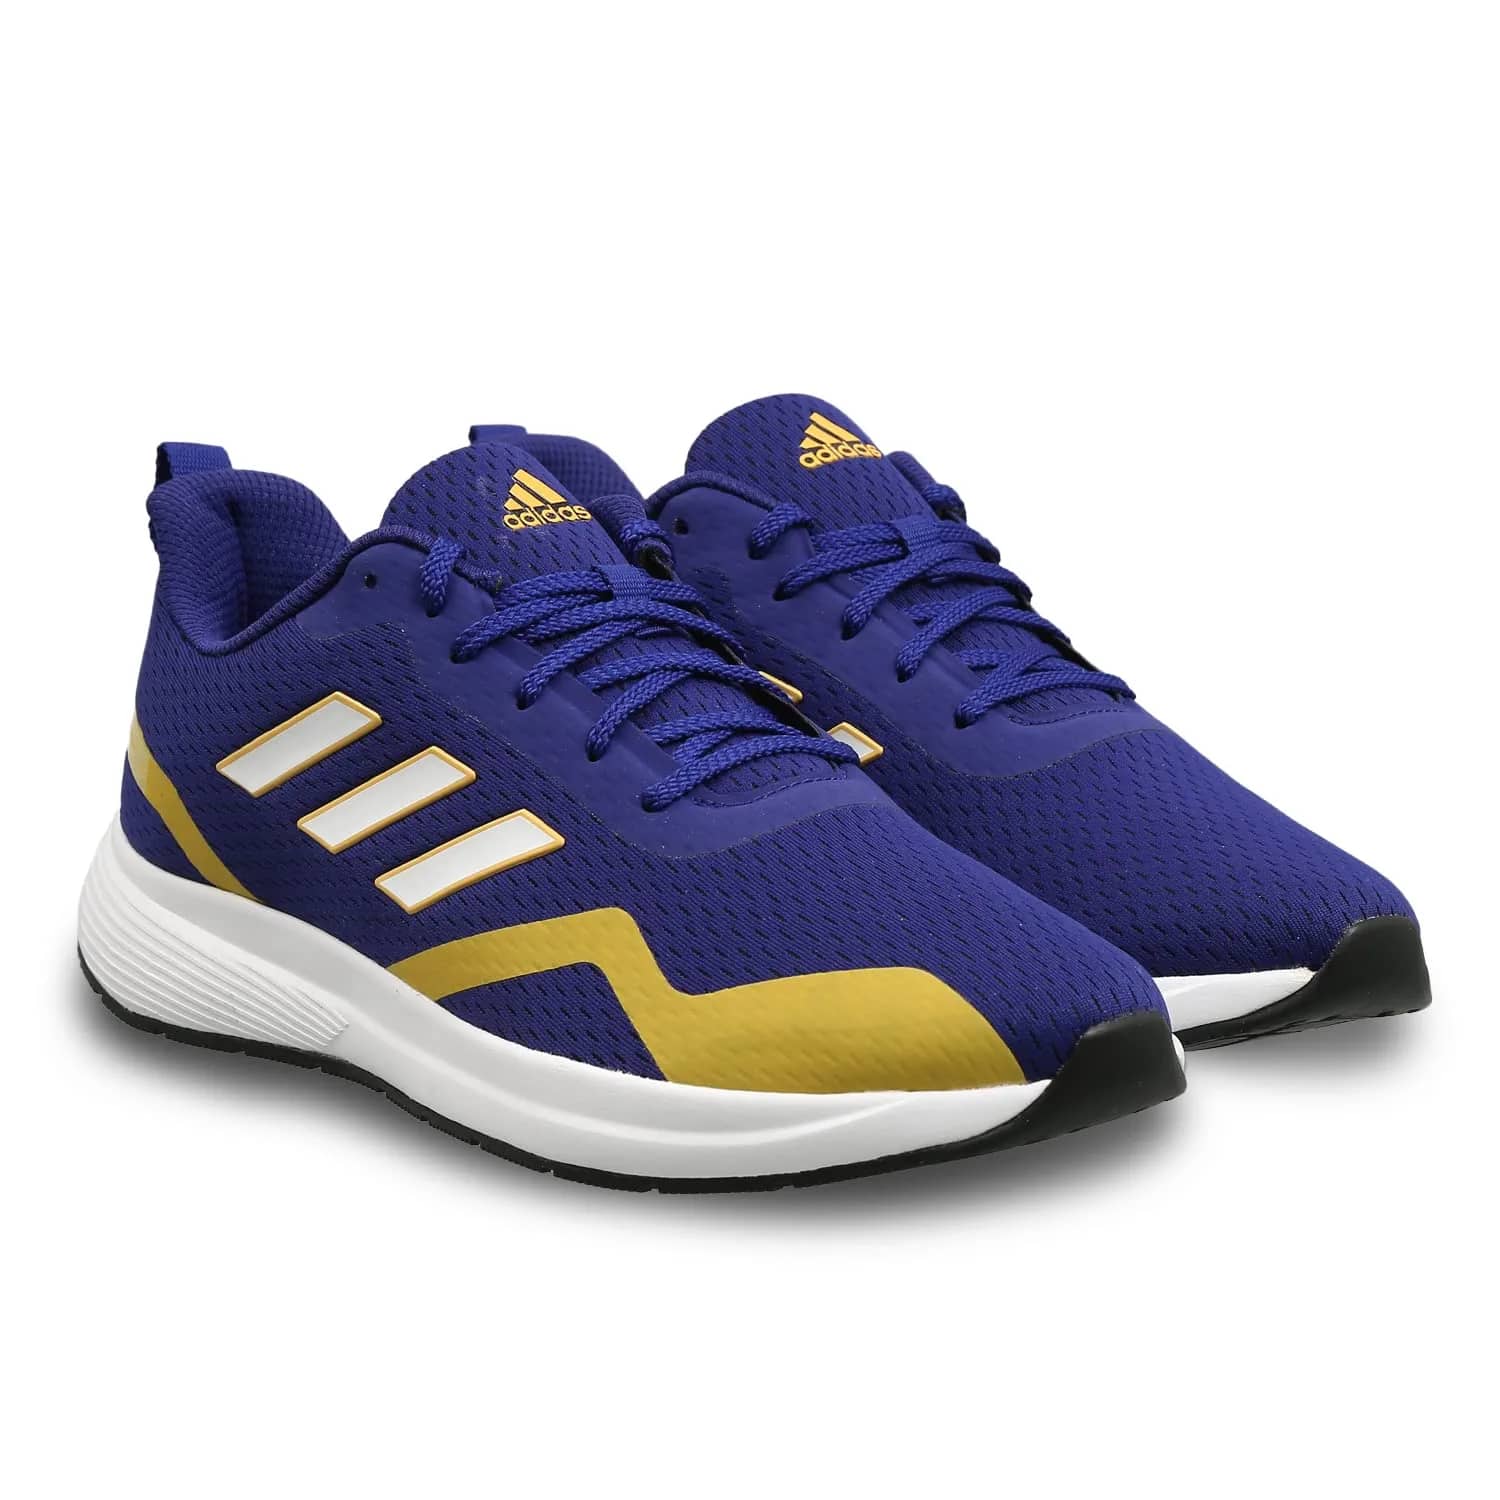 Top 5 Best Adidas Running Shoes for Men